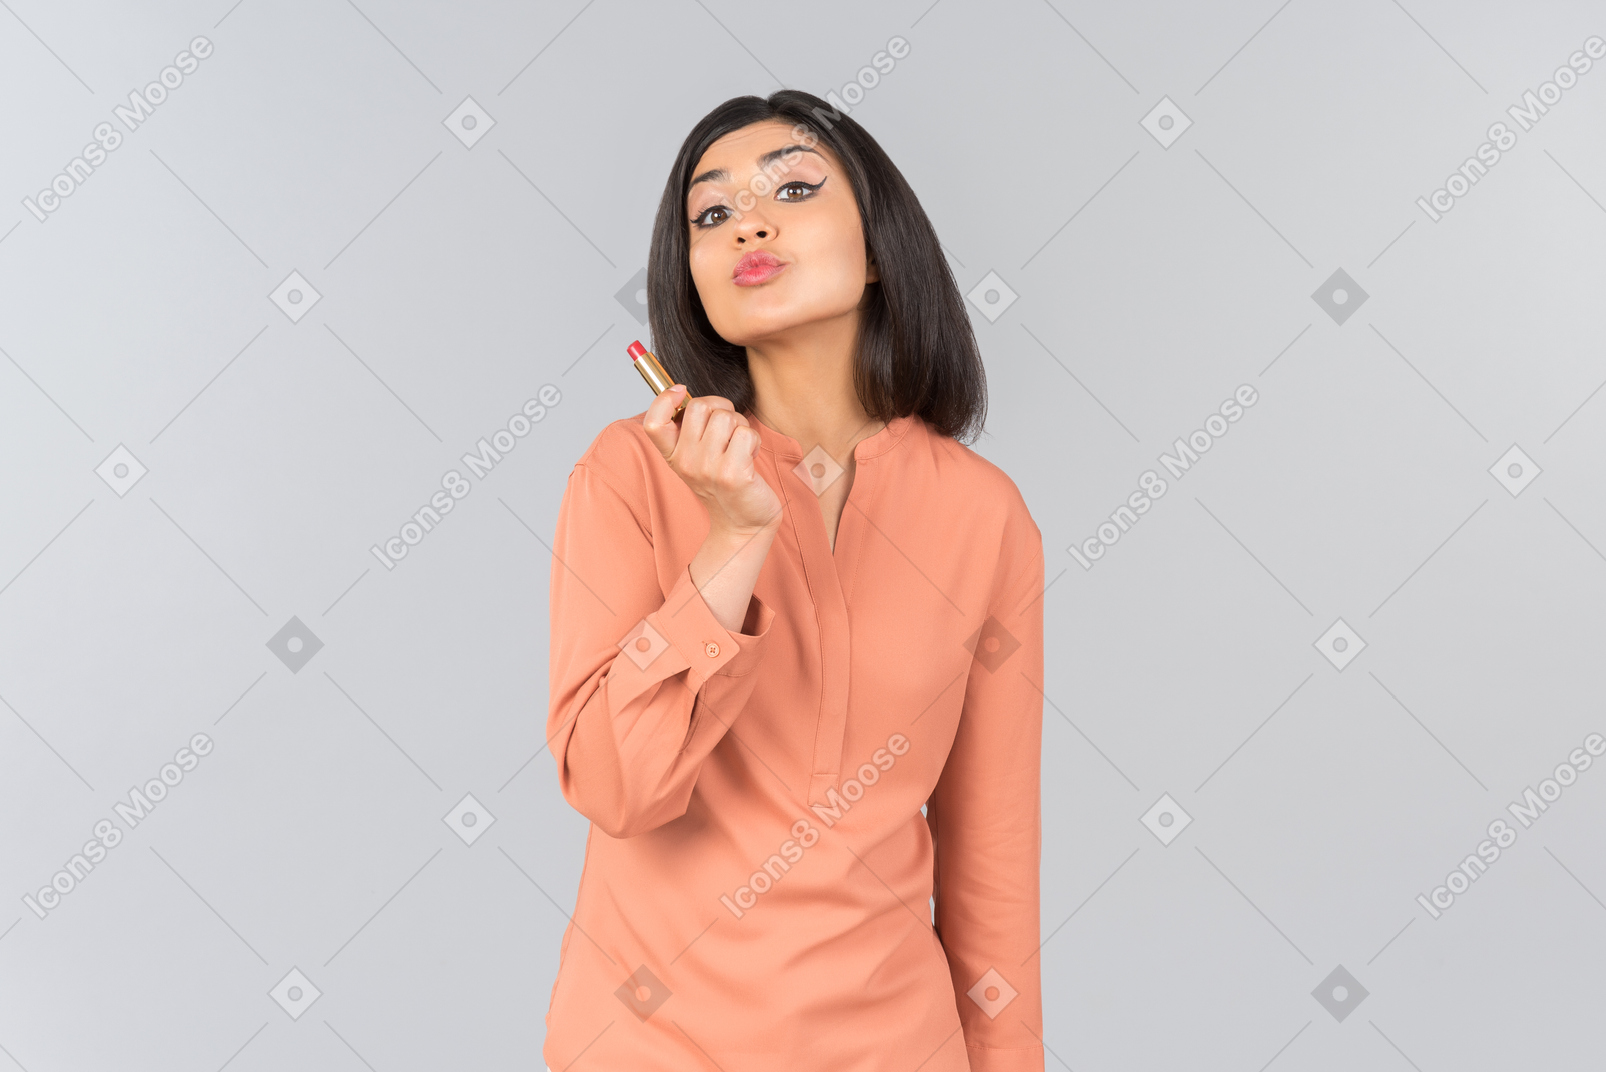 Indian woman in orange top holding lip balm and sending air kiss